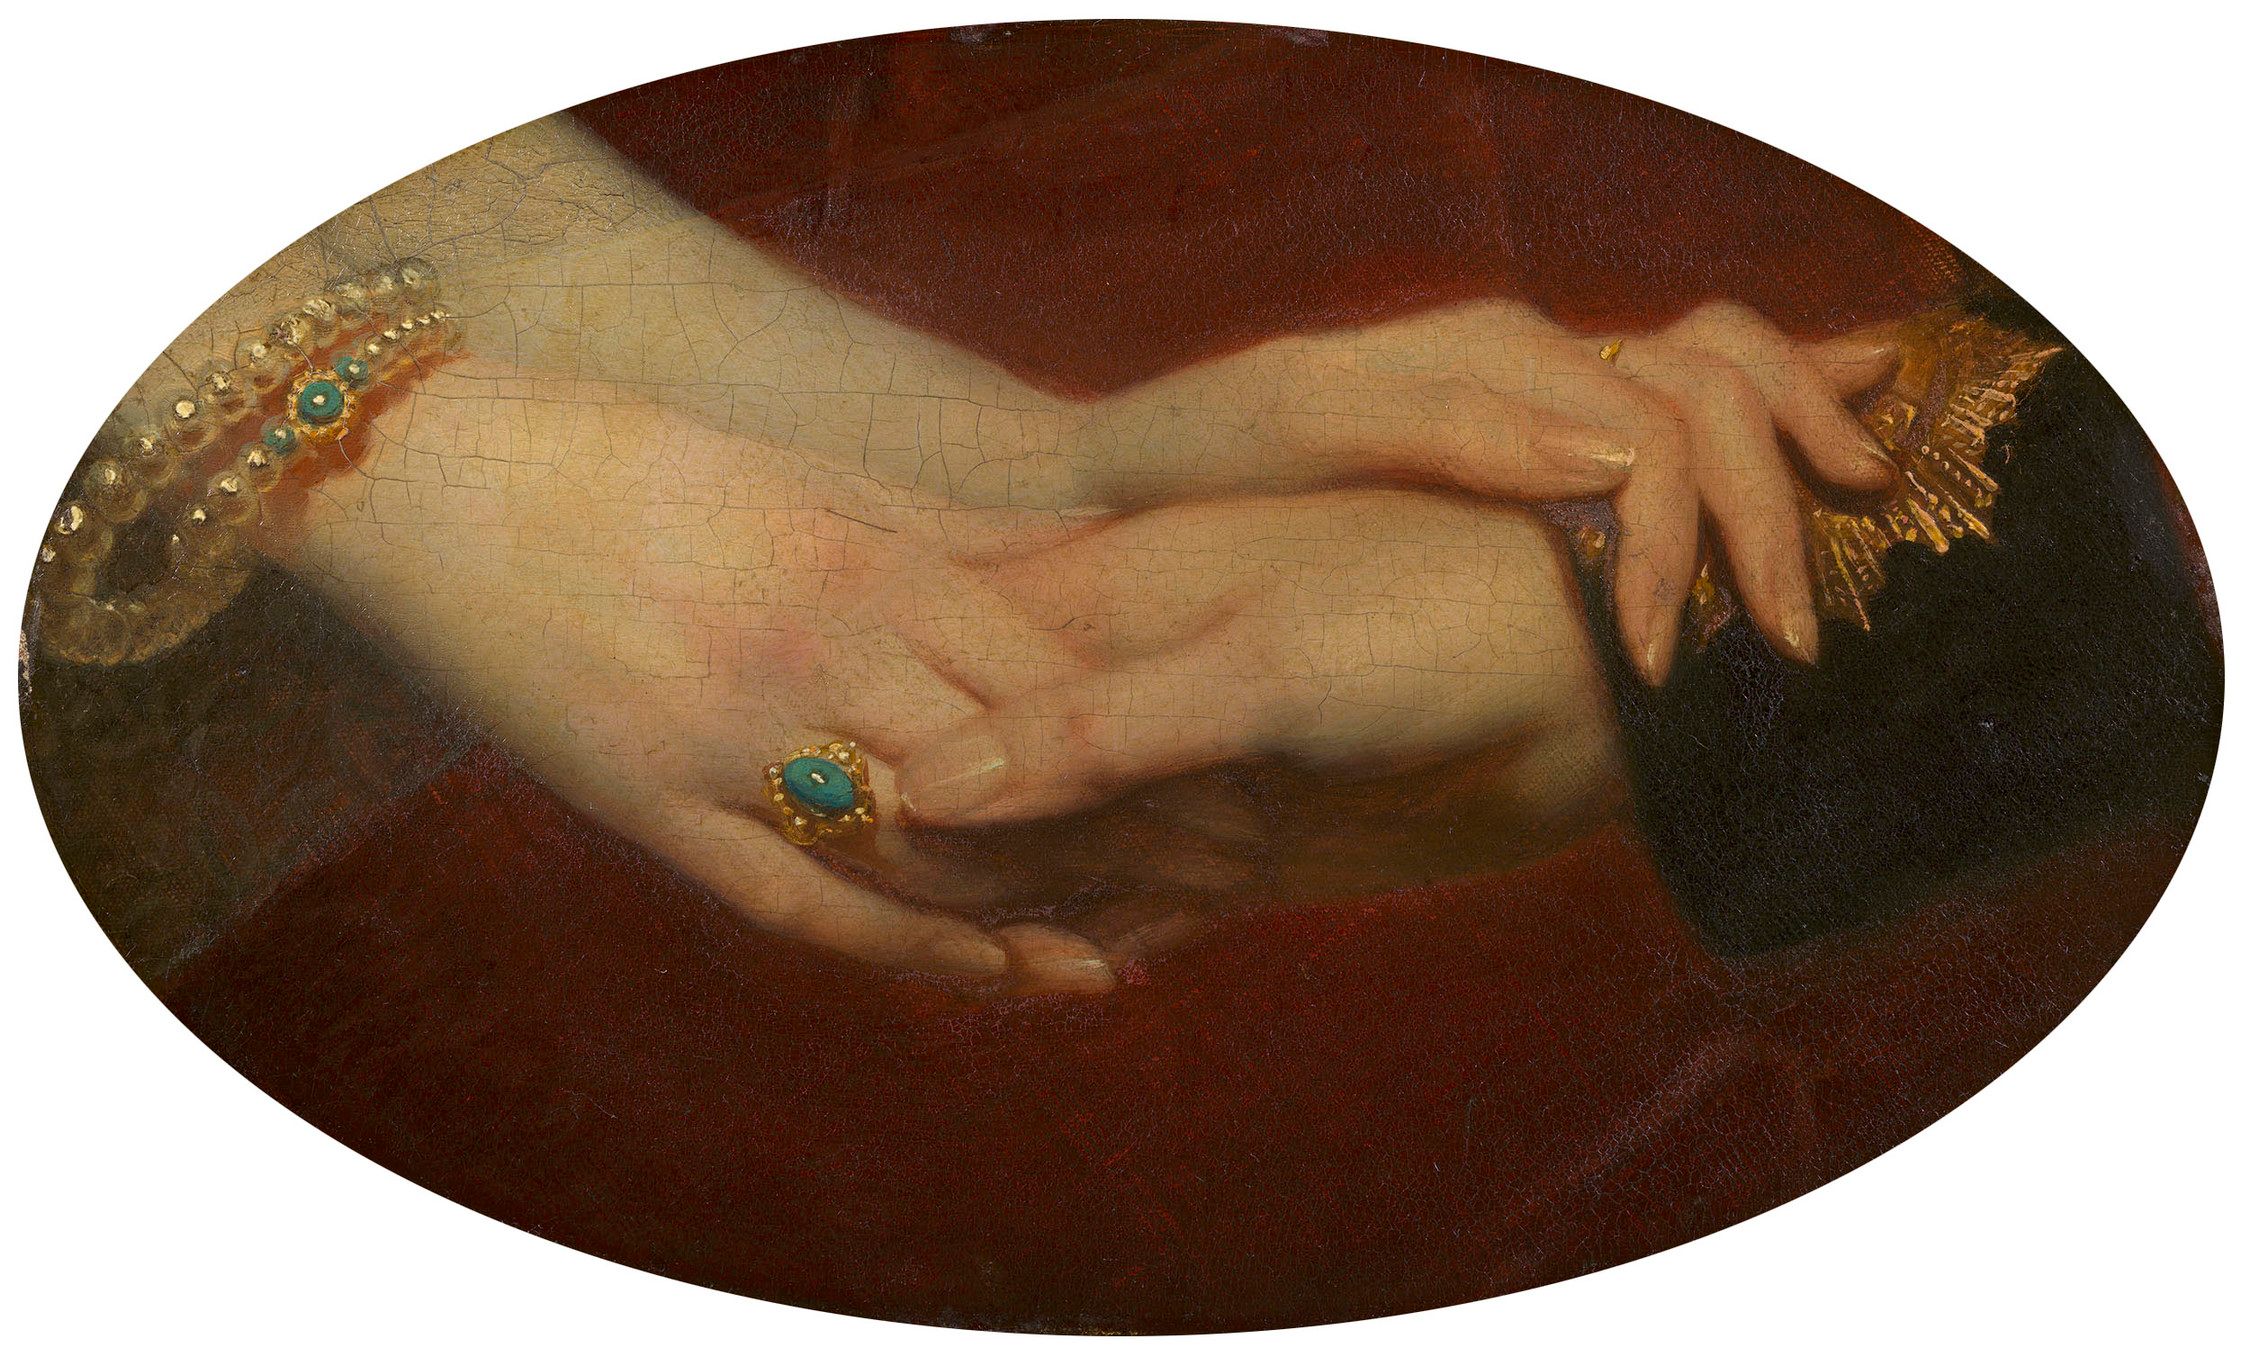 Linked hands of Victoria and Albert, Franz Xaver Winterhalter, in the Royal Collection Trust